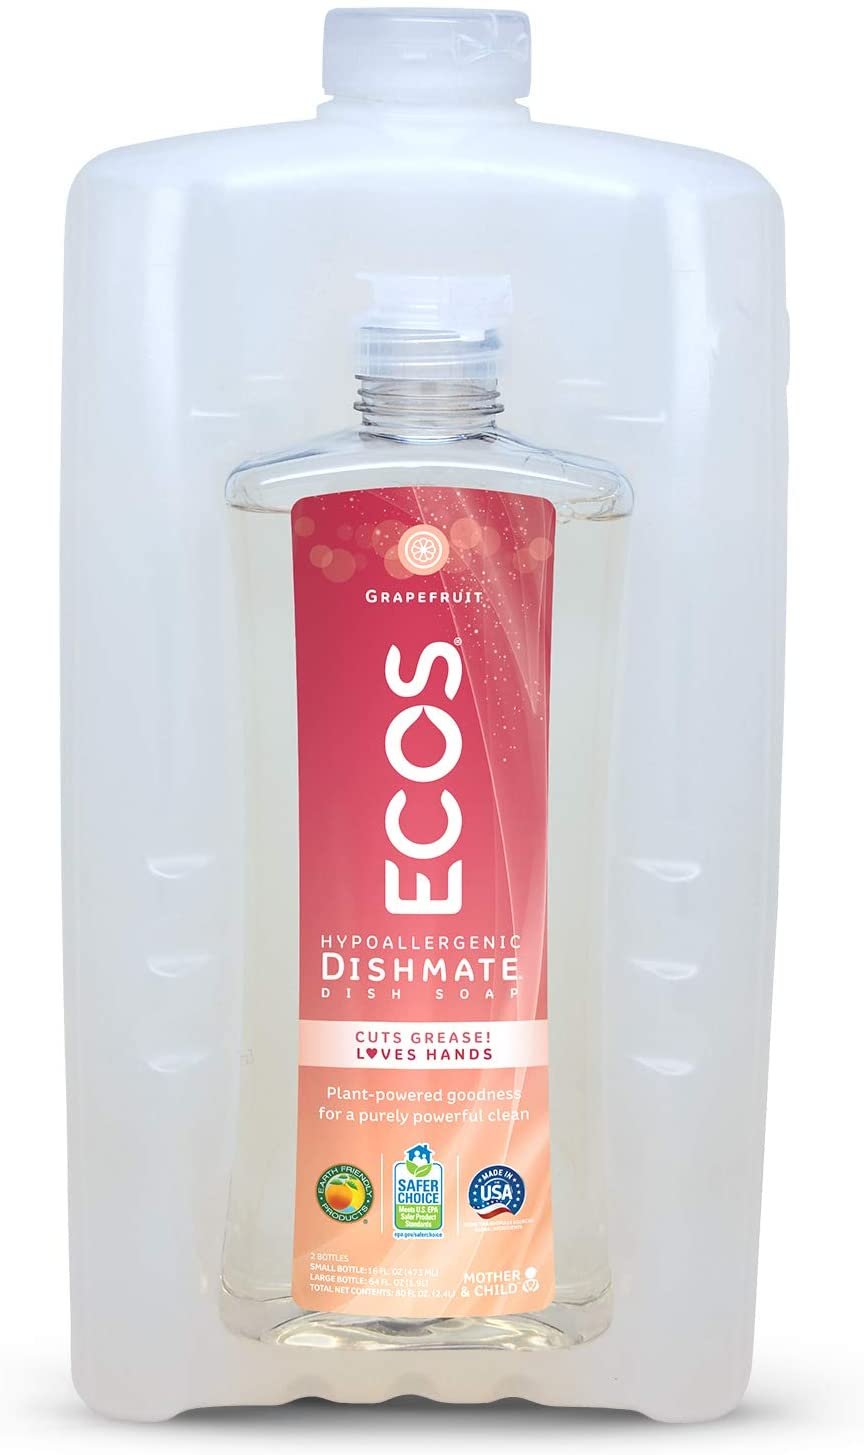 Non Toxic, Hypoallergenic Dishmate,  Grapefruit, Ultra-Concentrated,  Without Dyes, Parabens, Phosphates, Phthalates, Pack of  5,  80 FL OZ Per Pack